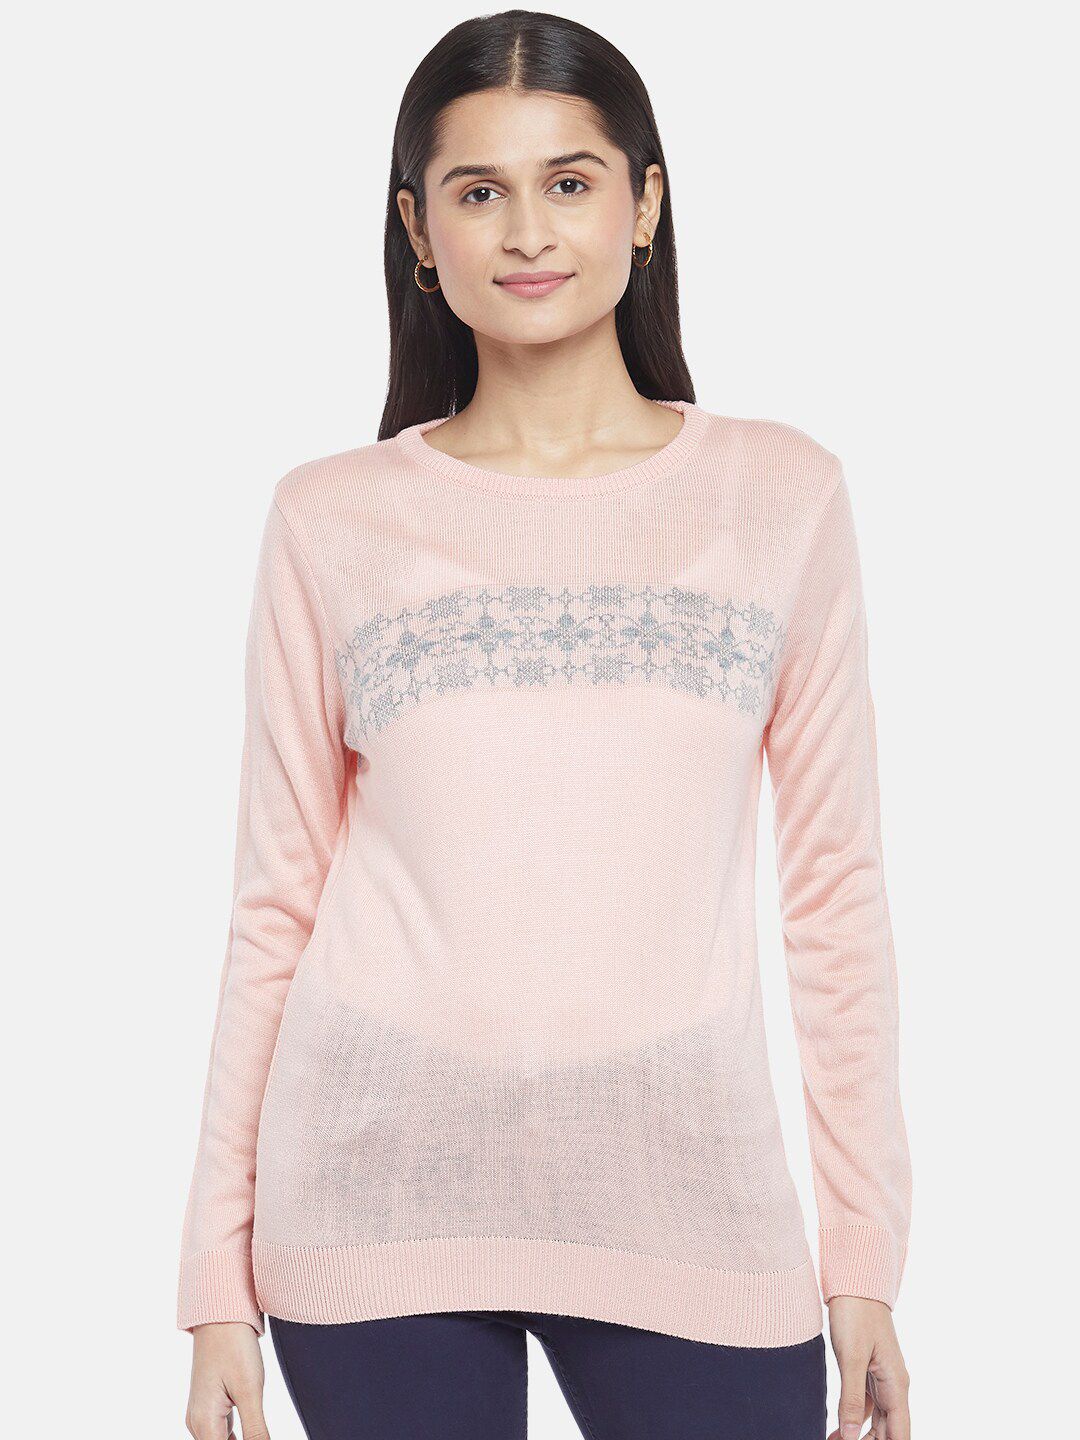 Honey by Pantaloons Women Peach-Coloured & Grey Printed Pure Acrylic Pullover Sweater Price in India